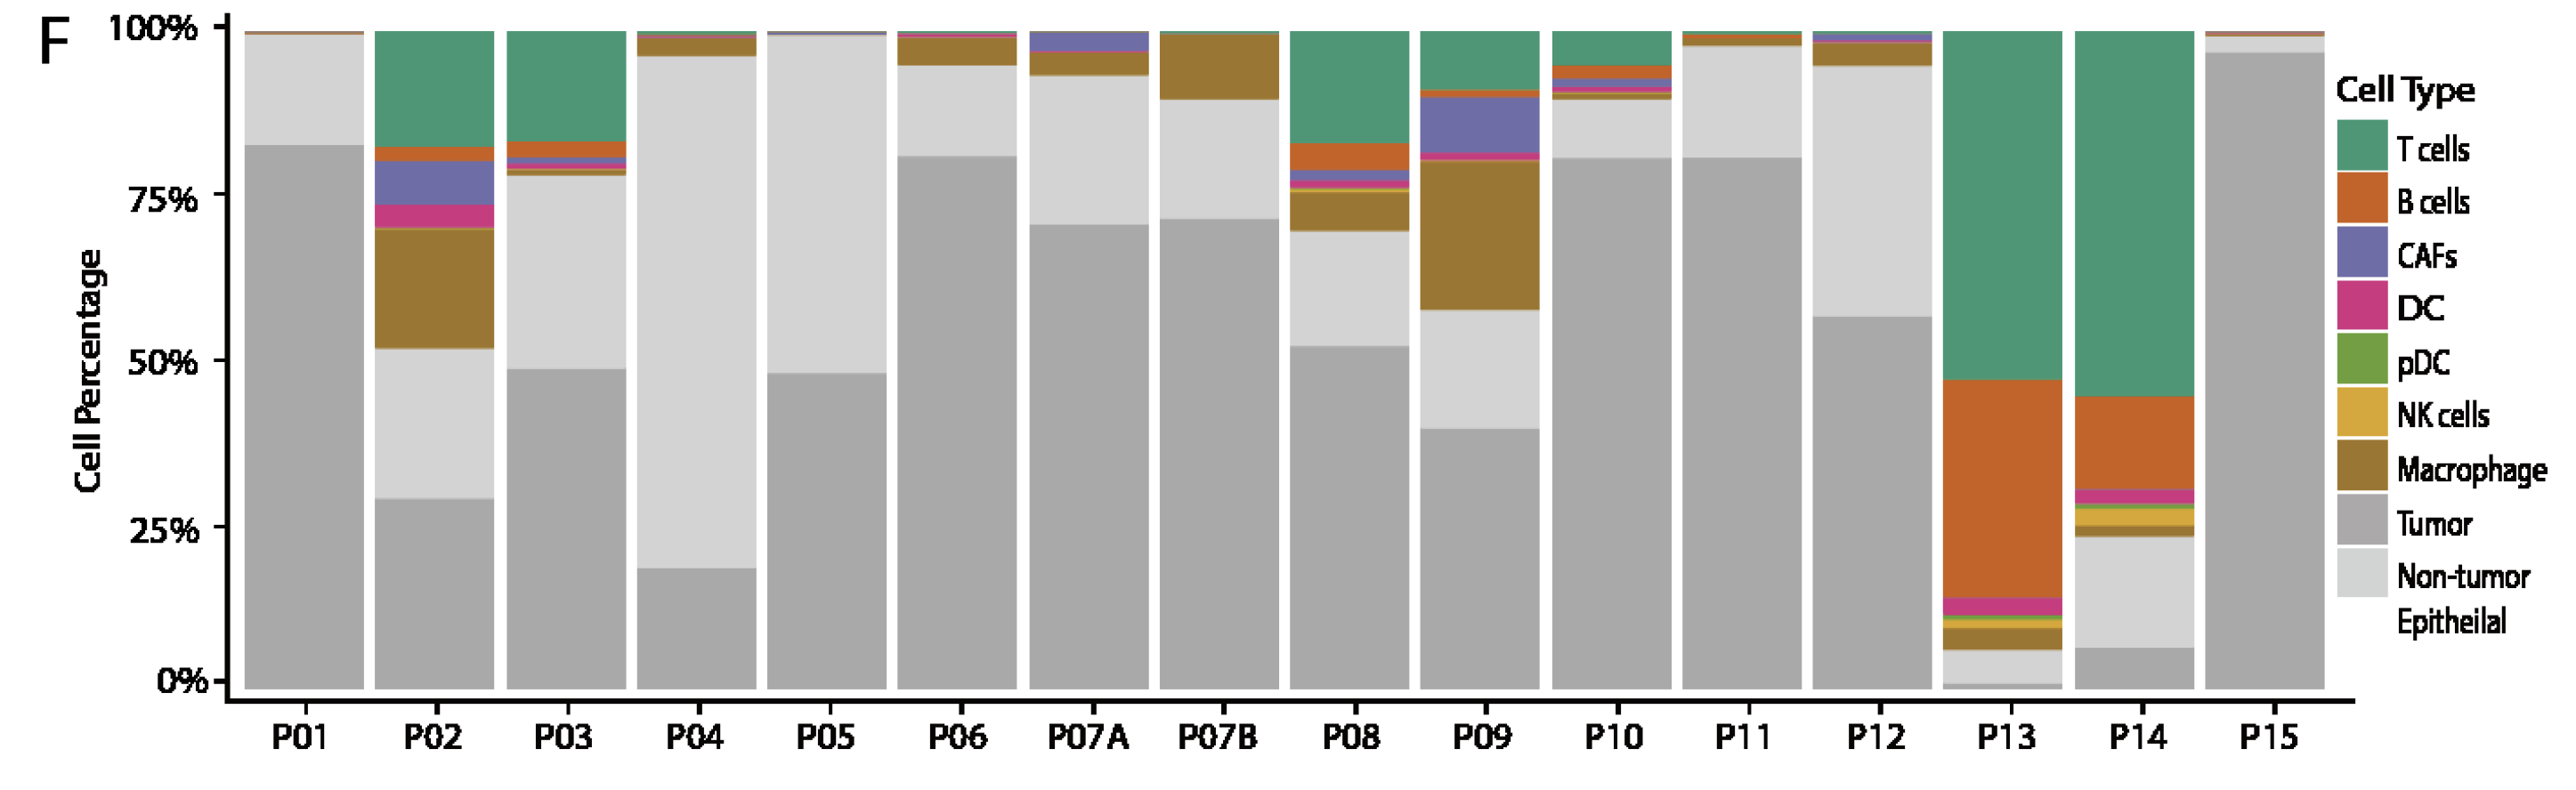 percentage-of-cell-types-of-patients.png